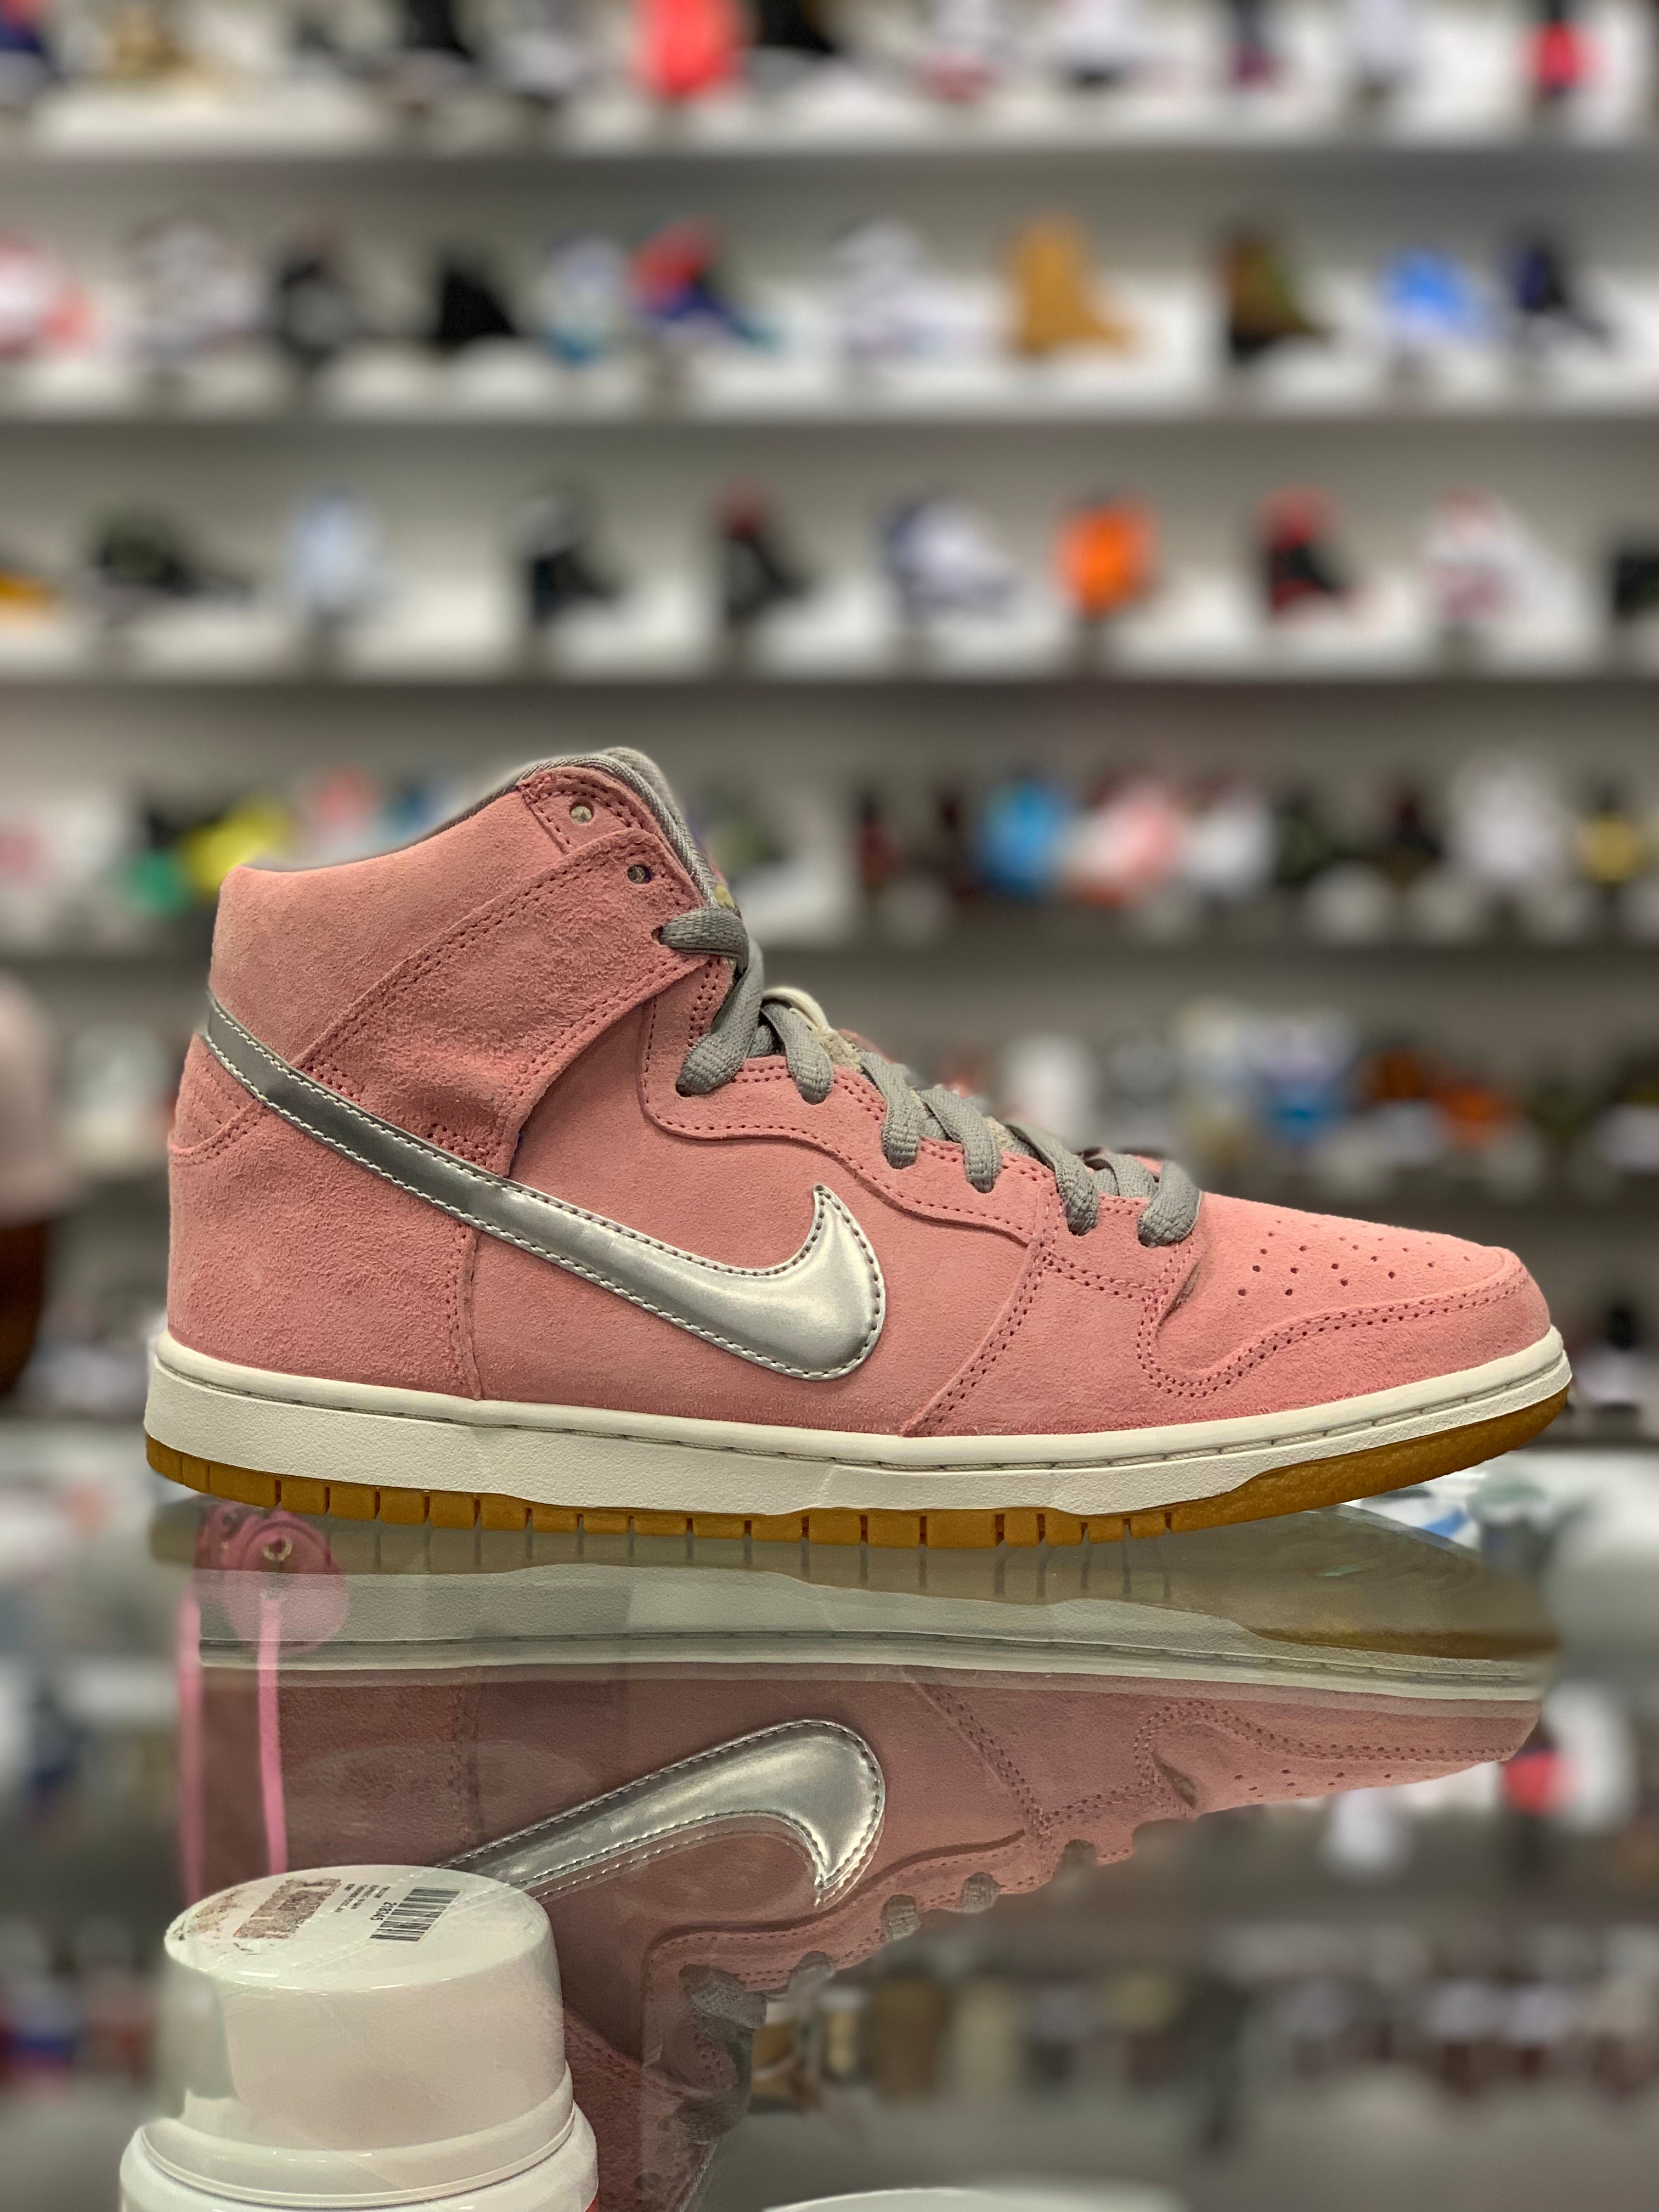 Nike Dunk SB High “When Pigs Fly”